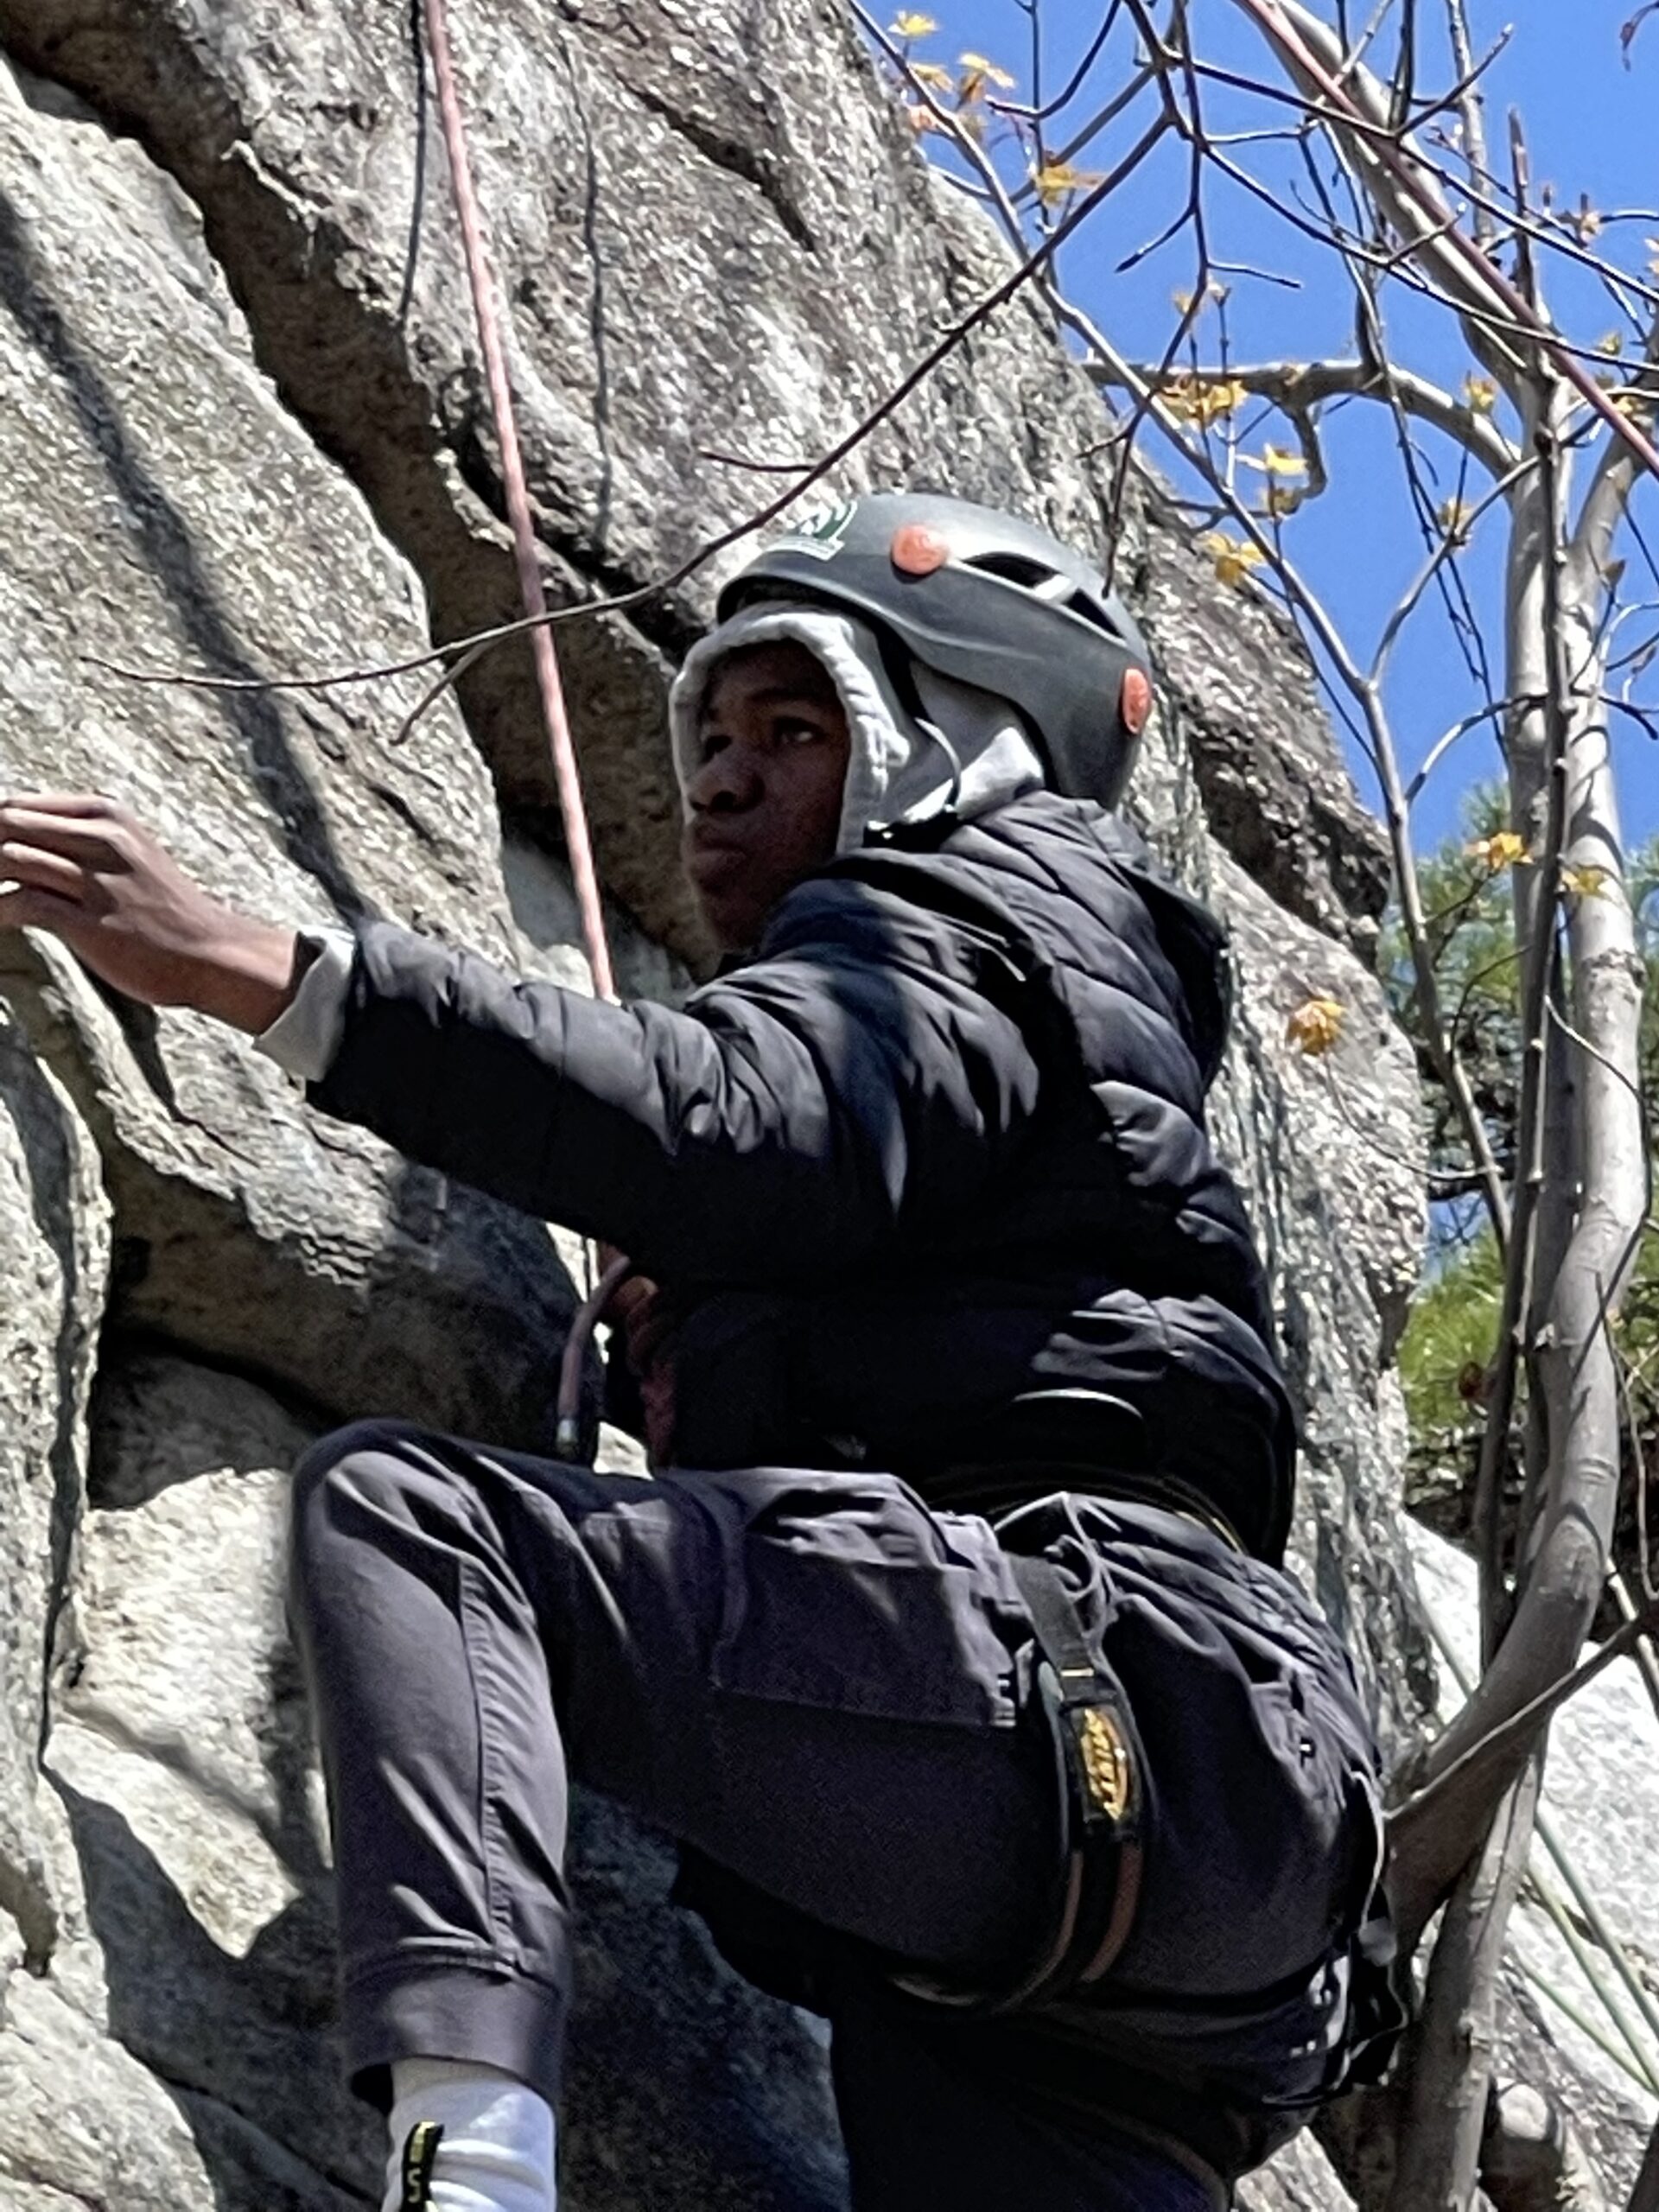 Scout Troop 455 ventured to New Paltz to climb “the Gunks” (Shawangunk Mountains) last week with five Scouts and four leaders attended the event that comprised vertical climbing and rappelling down a 90-foot shear rockface.  Following the climb, the Scouts camped overnight and returned home on Sunday.  COURTESY SCOUT TROOP 455